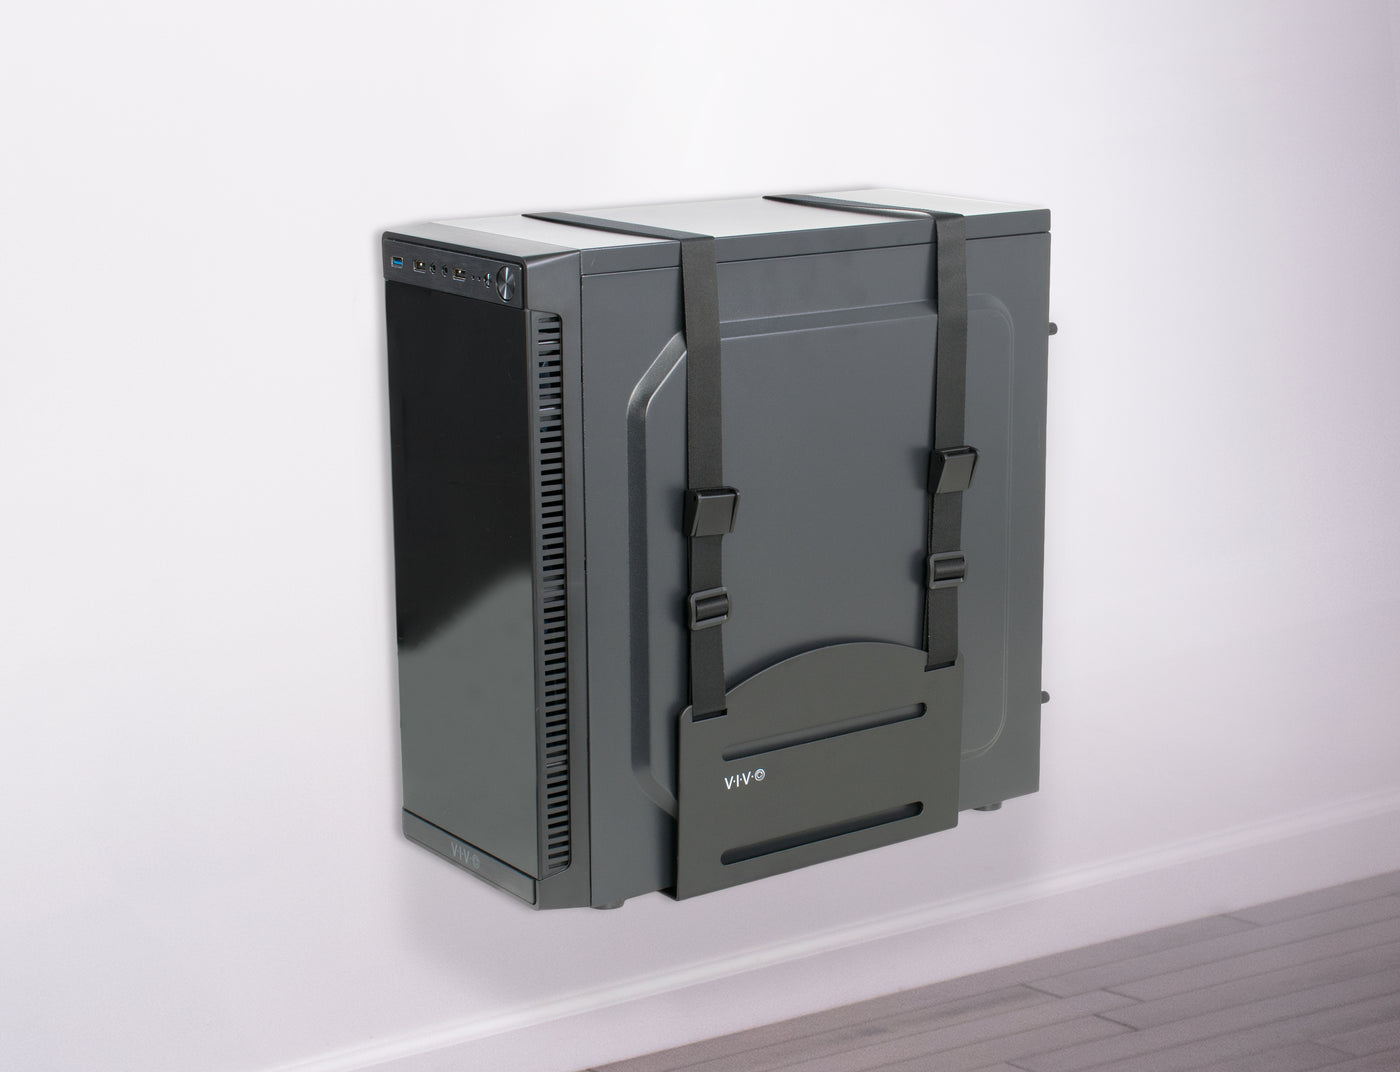 Large PC securely attached to wall.